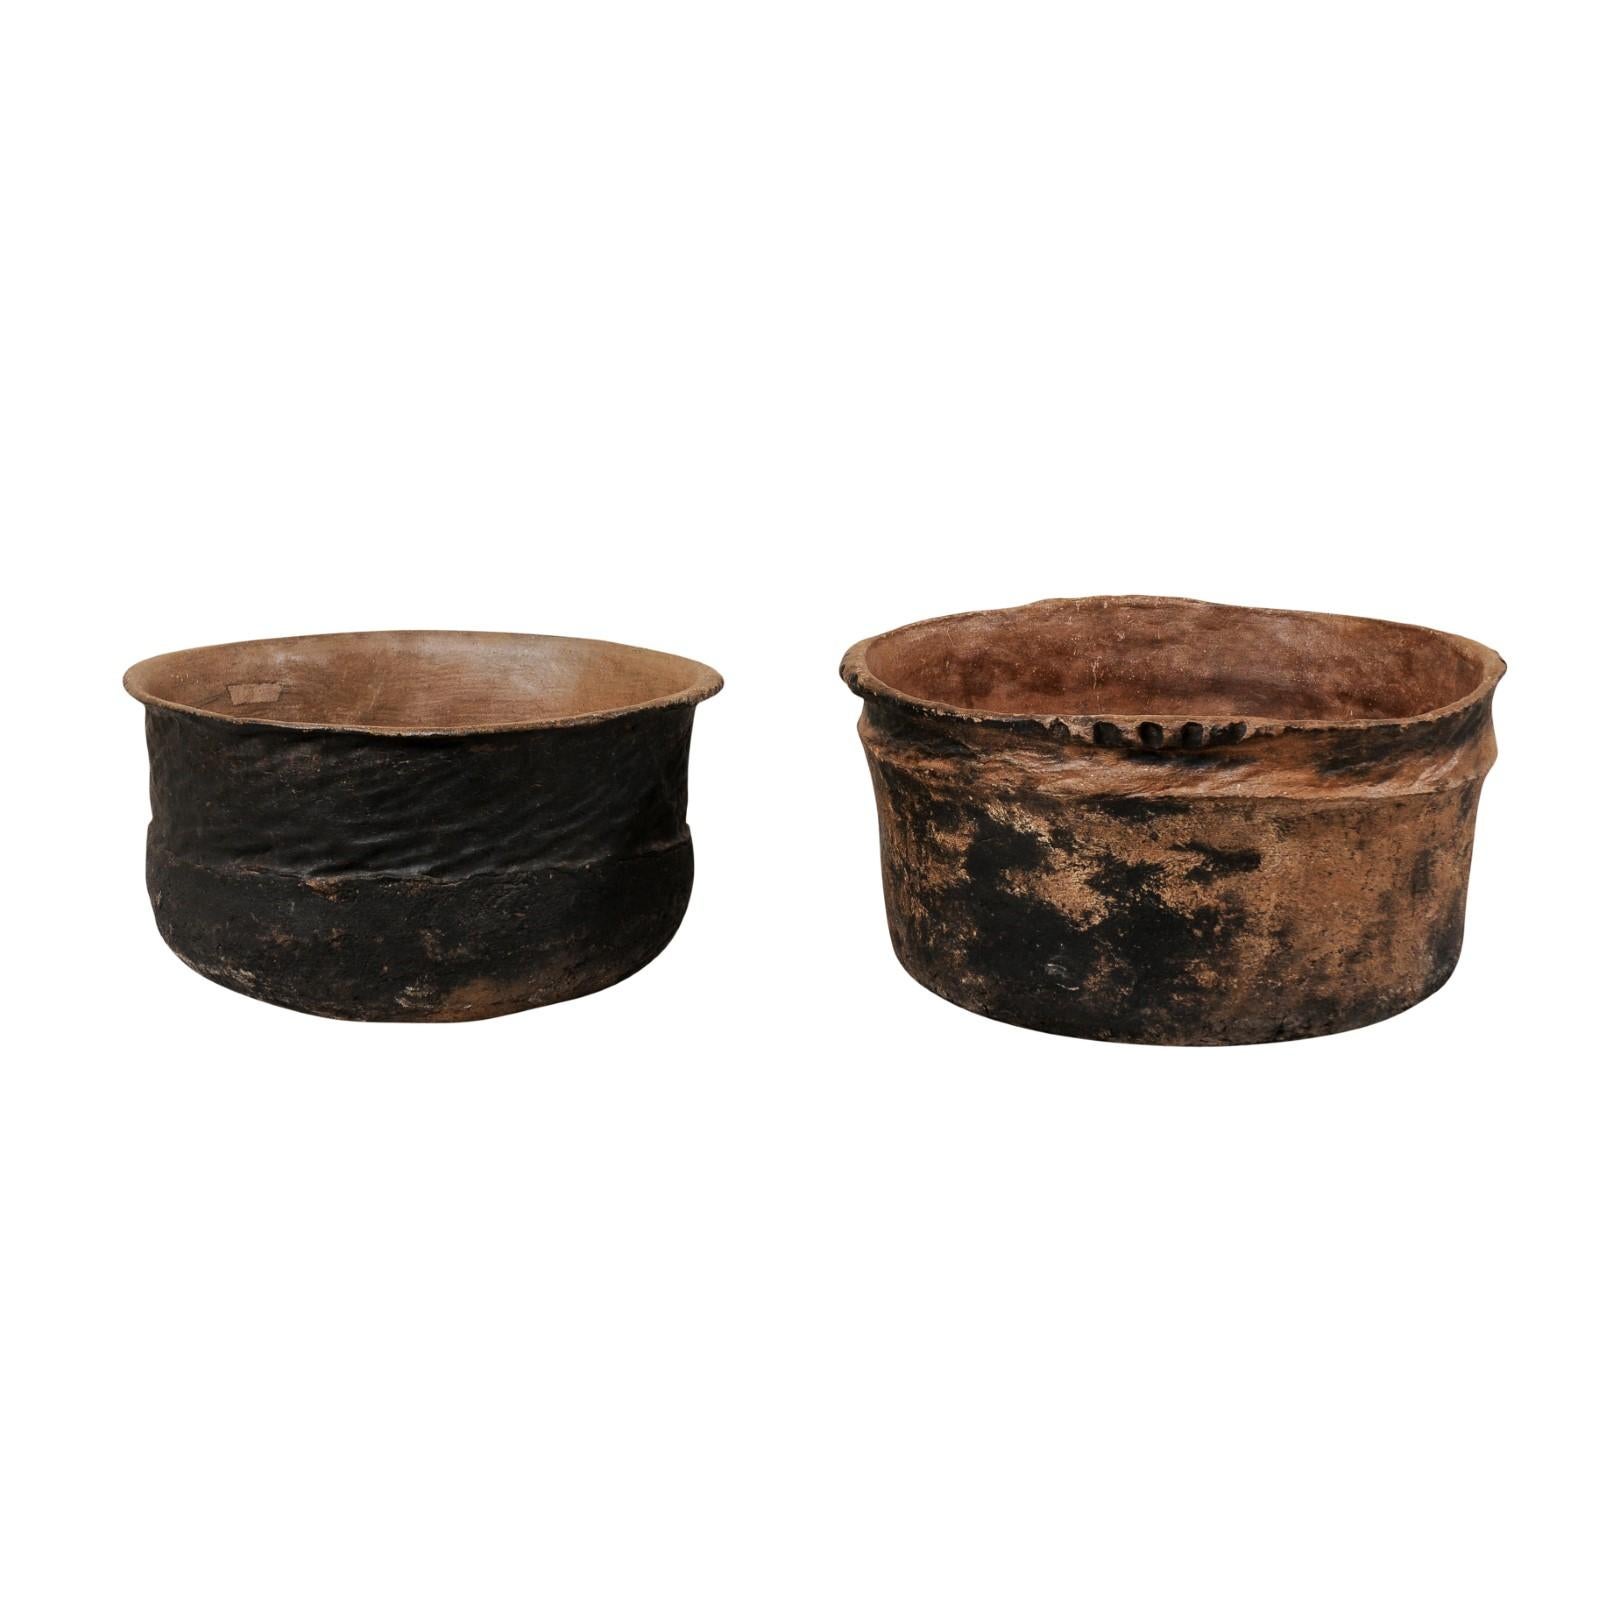 Pair of Guatemalan Clay Cooking Pots from the Early 20th Century